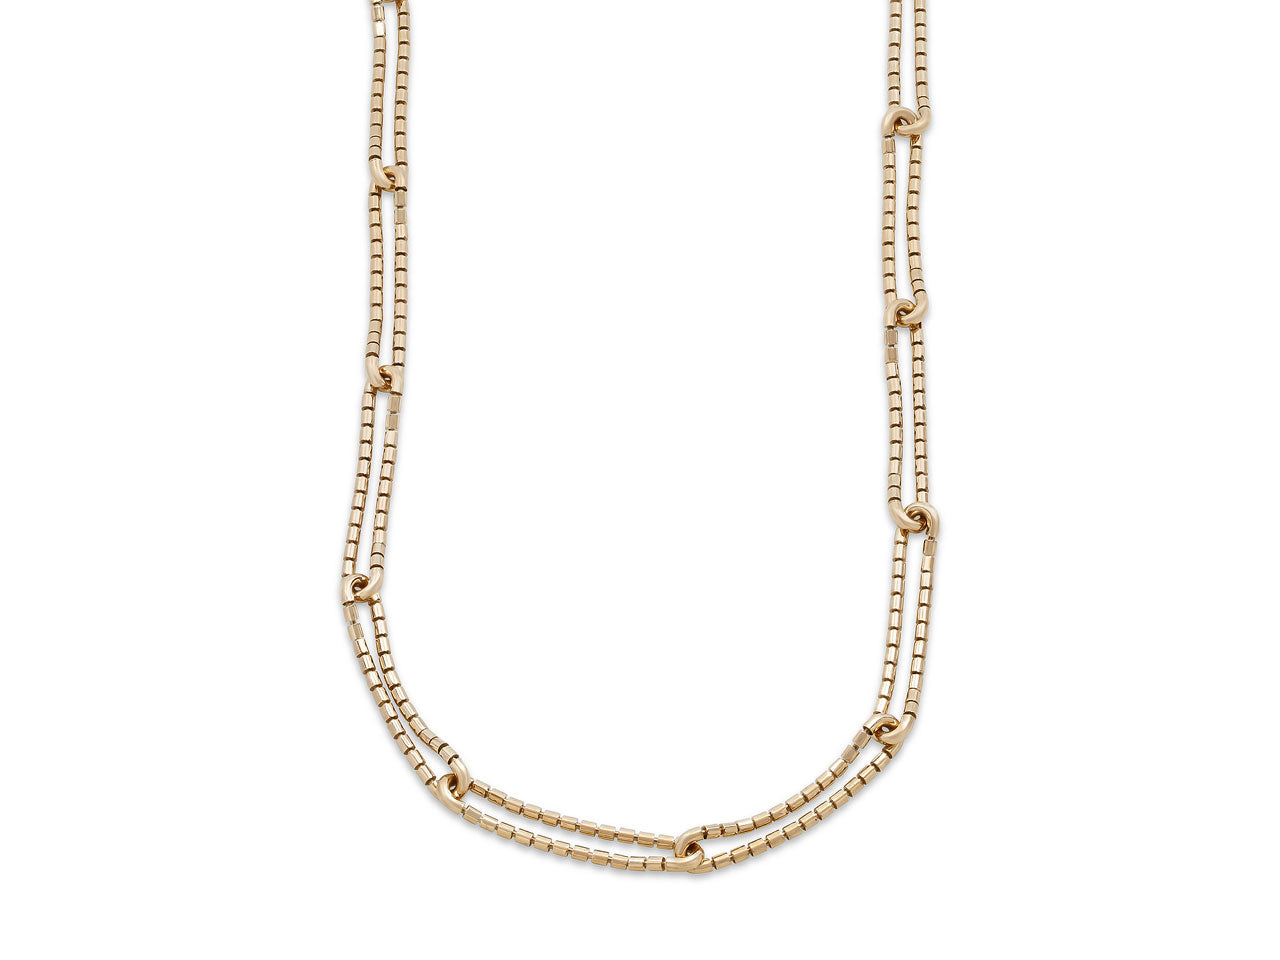 Italian Gold Flexible Link Chain Necklace in 18K Gold, by Beladora